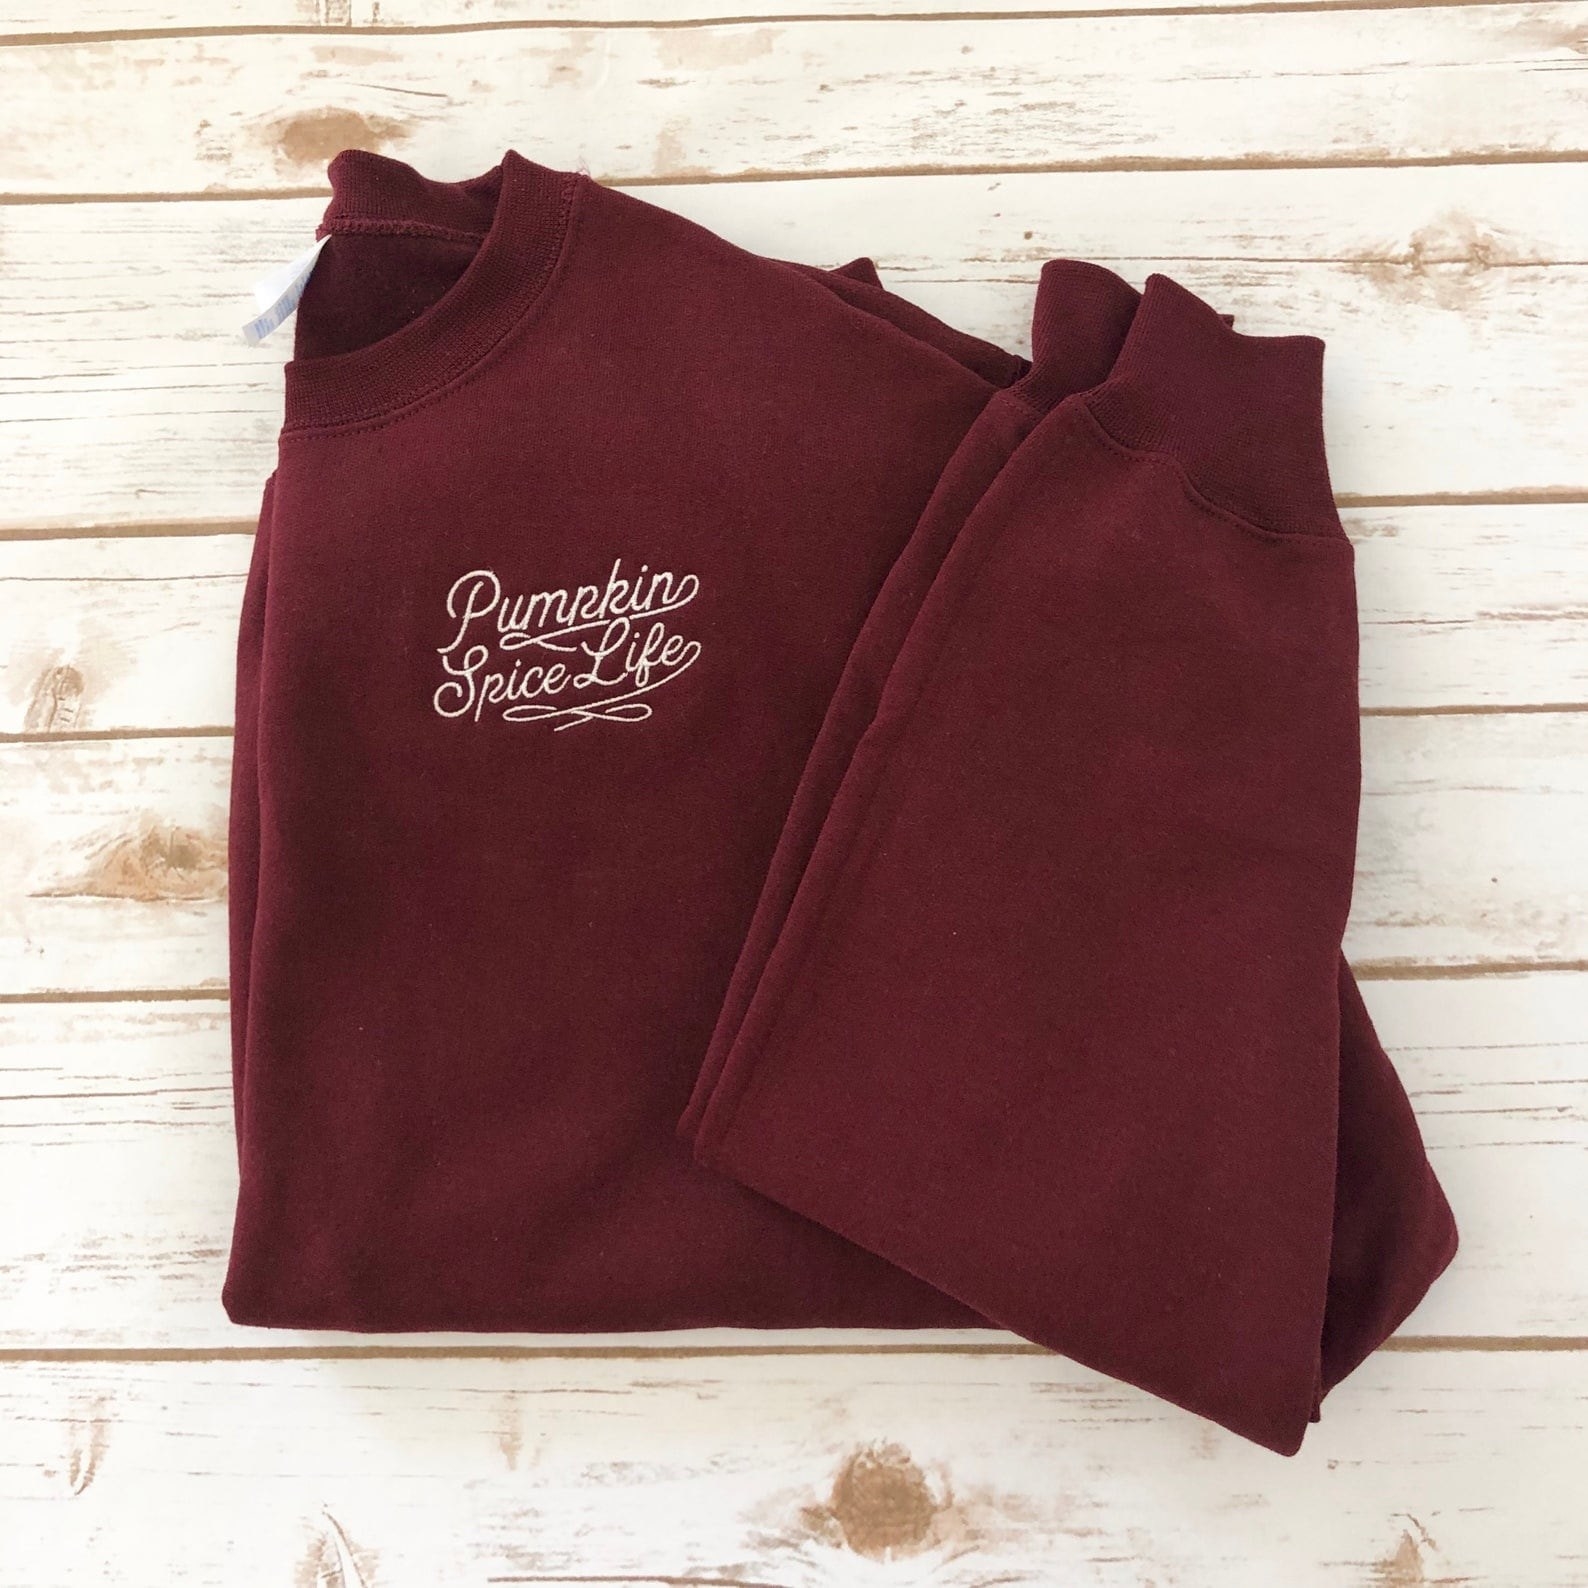 a maroon colored sweatshirt with white embroidery that says pumpkin spice life on it